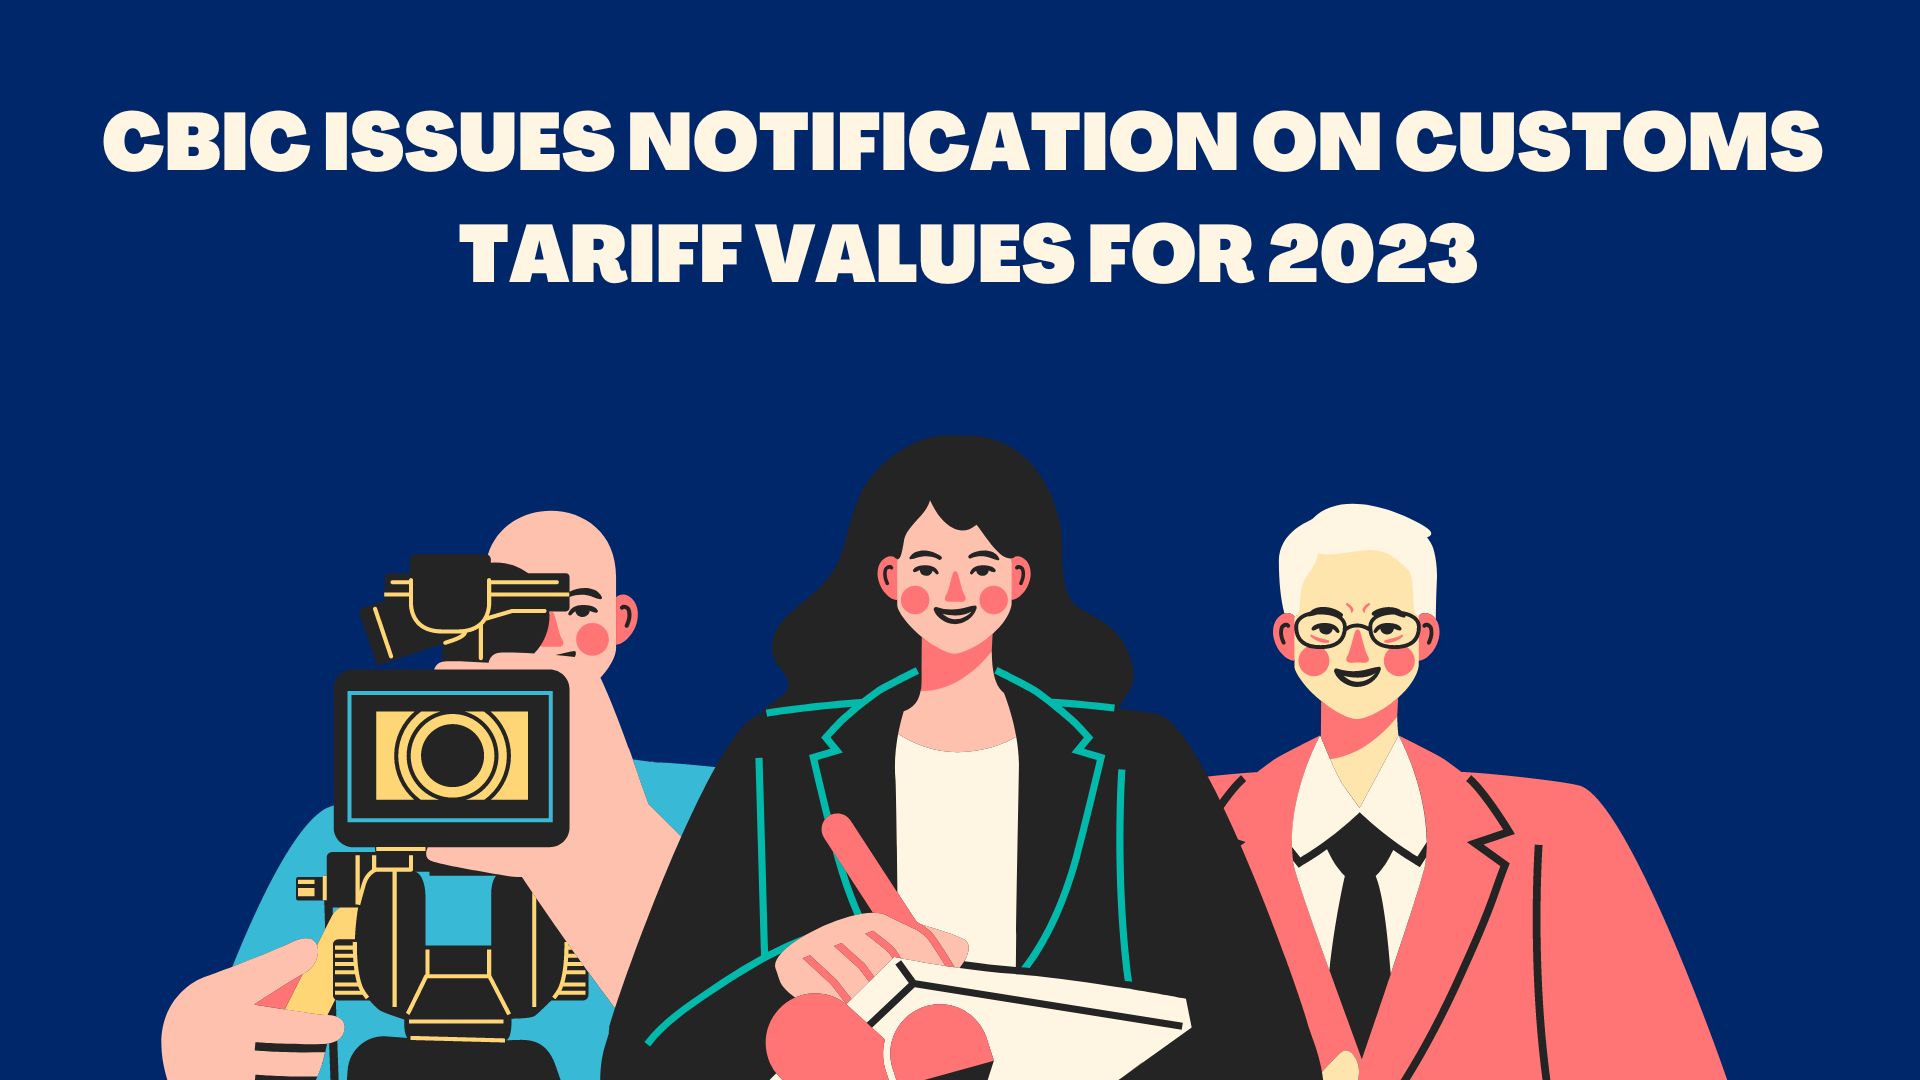 CBIC Issues Notification on Customs Tariff Values for 2023